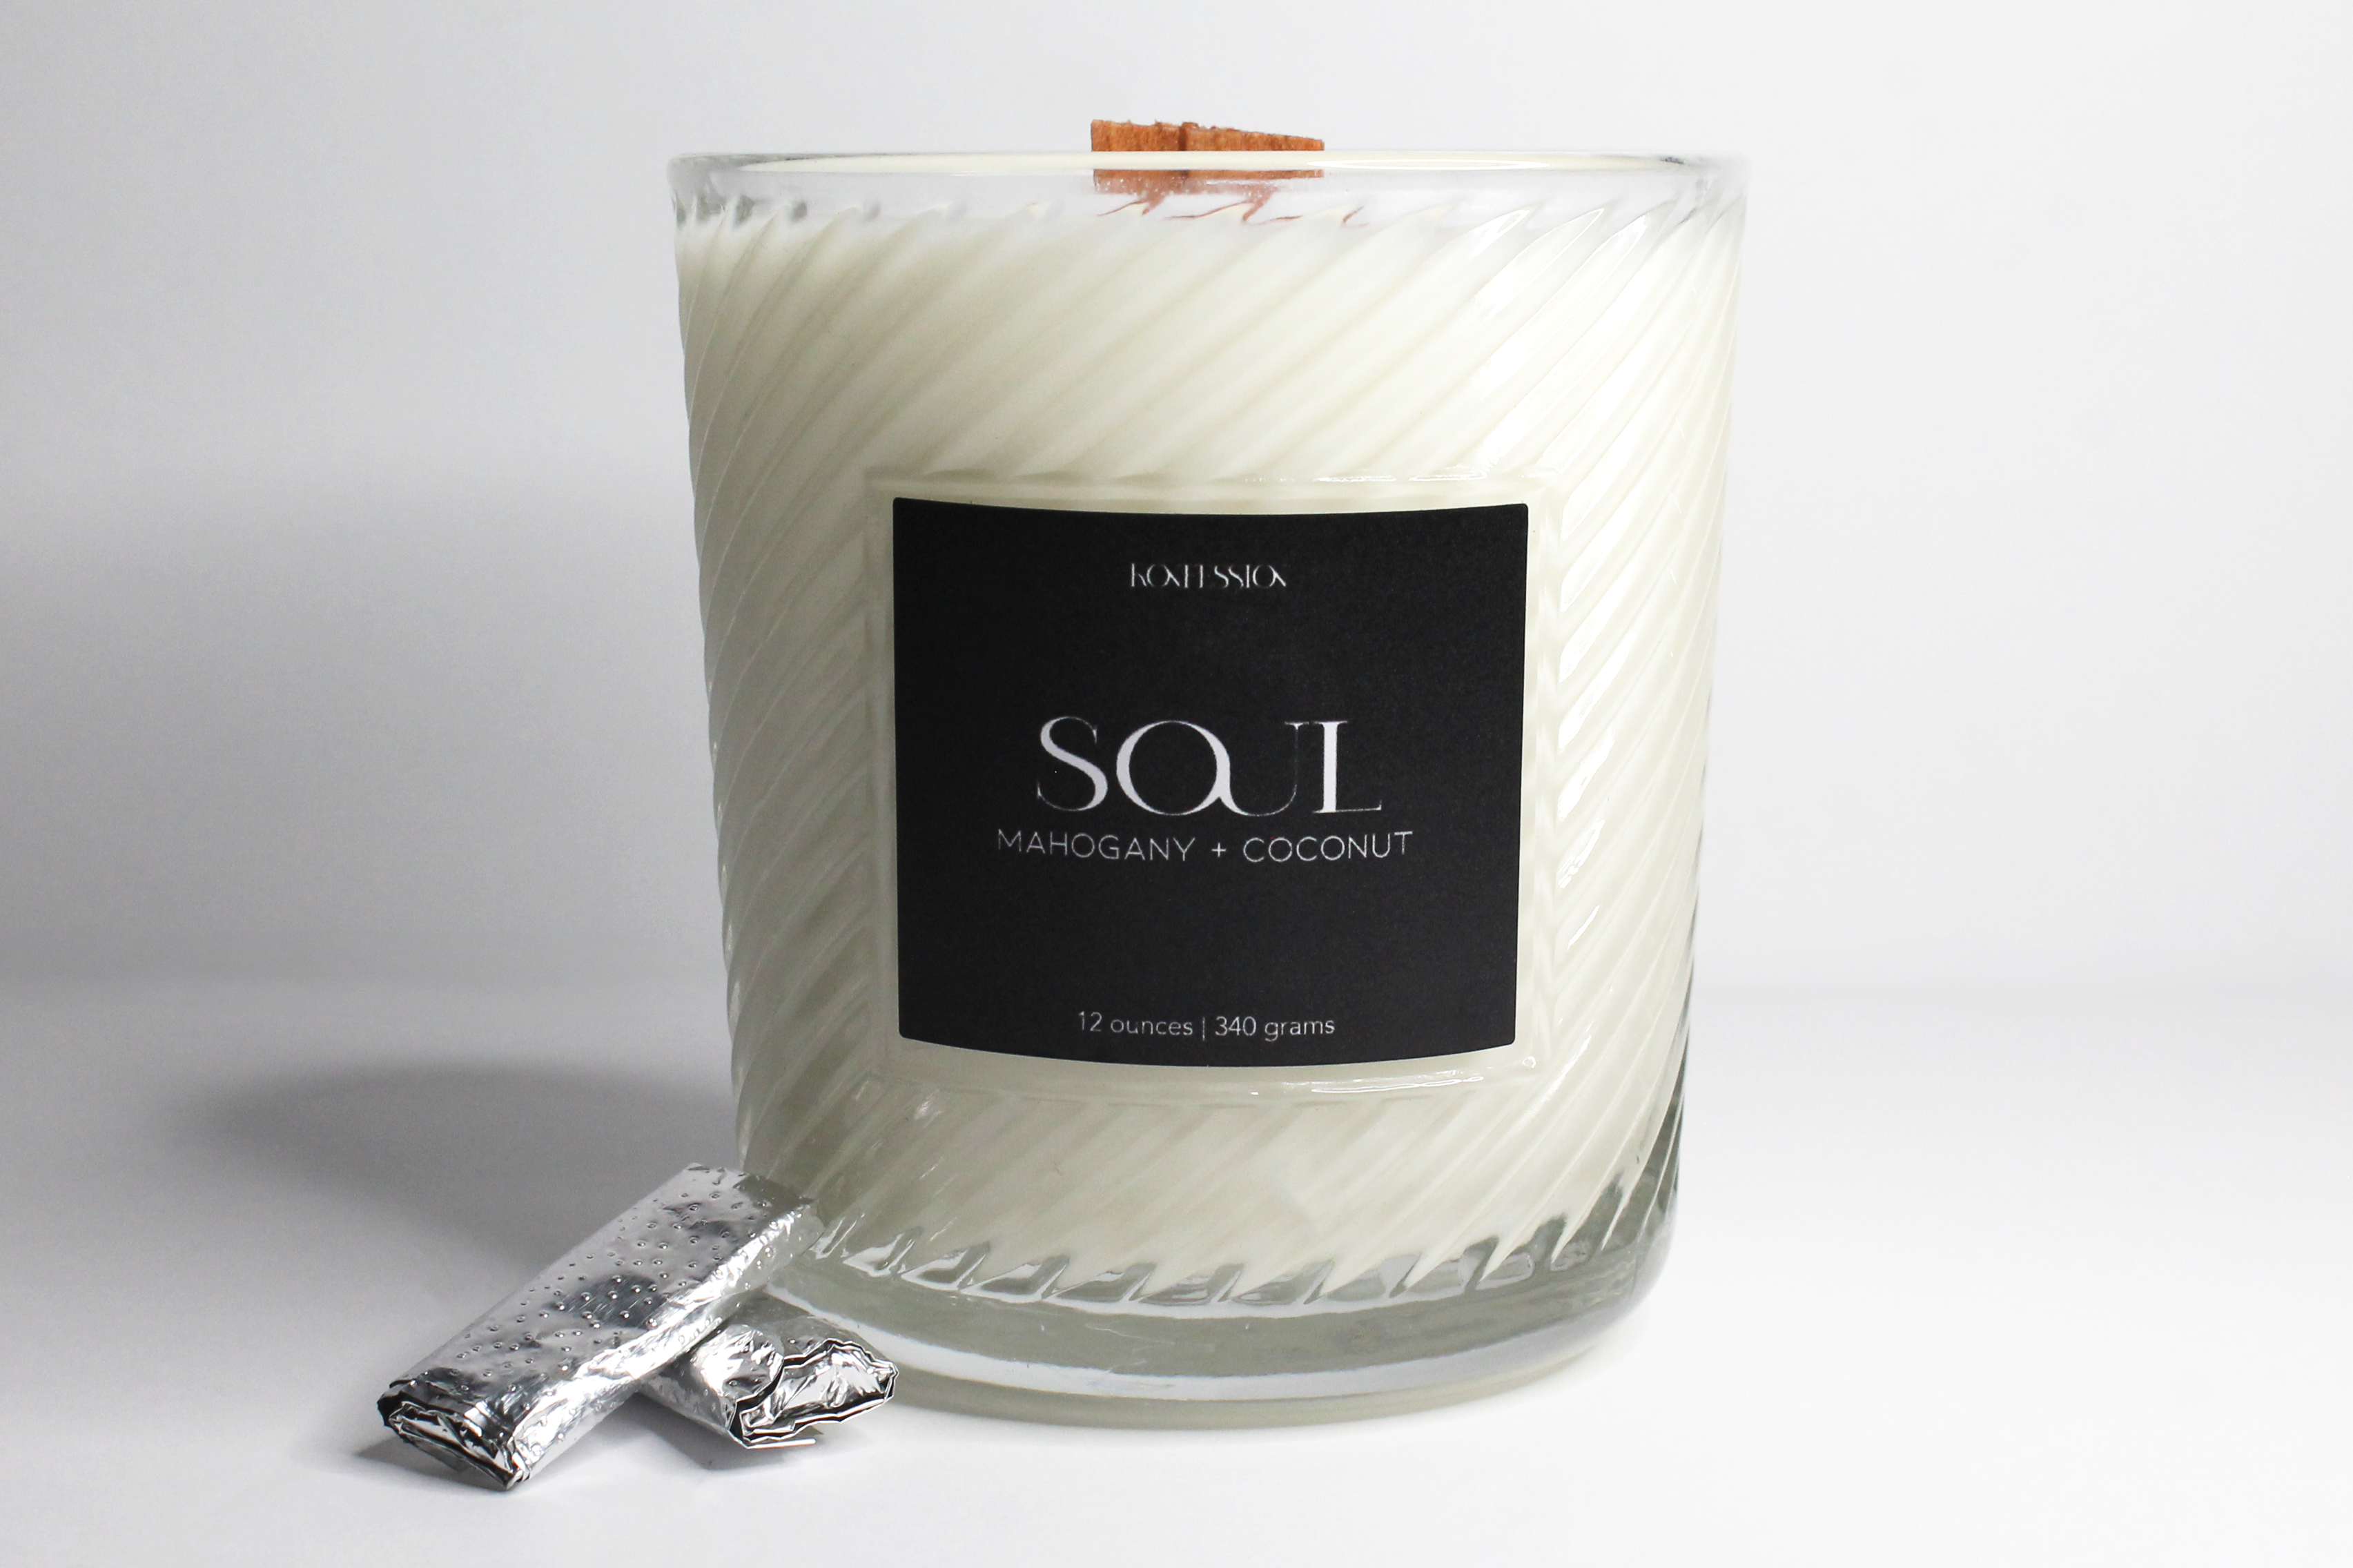 12 ounce soy wax candle in the scent of mahogany and coconut with a burn to reveal secret hidden inside.